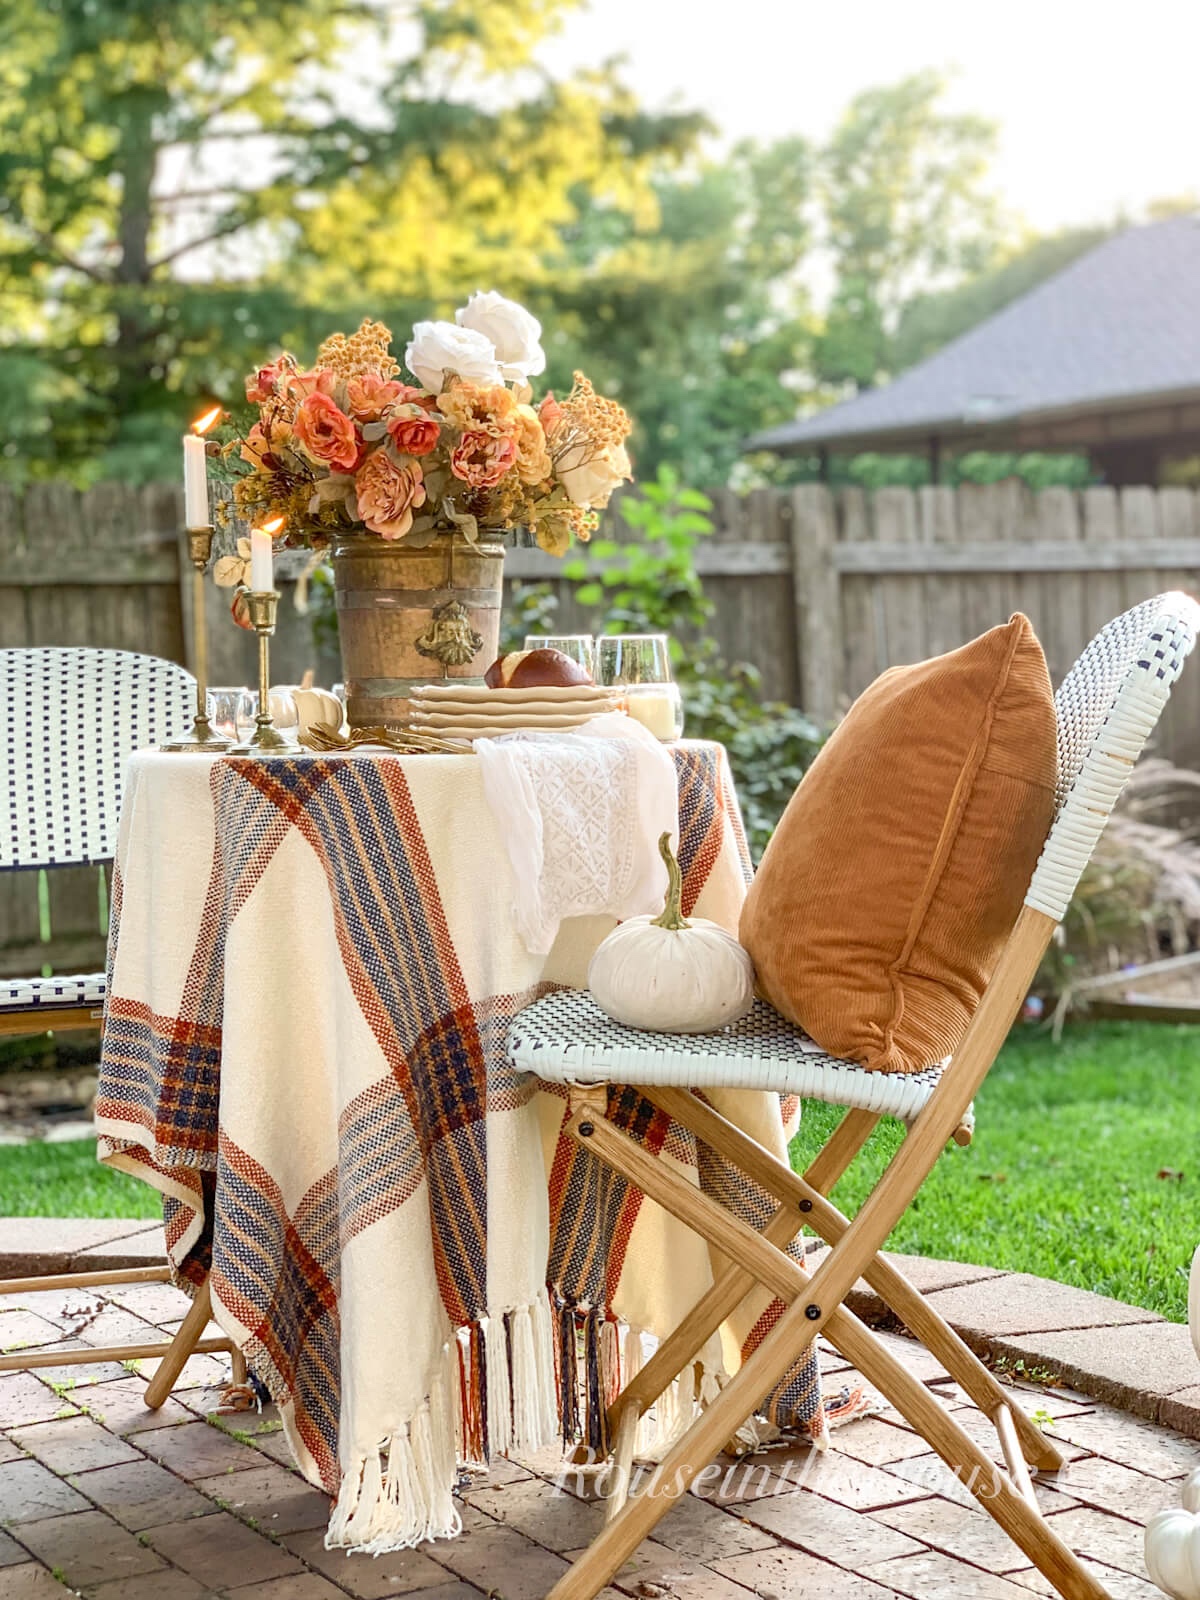 Fall patio decor: Fall Tablescape on Brick Patio. Faux fall flowers in a vintage copper bucket, plates, and brass candlesticks create a fall centerpiece on an outdoor table on the patio.  The woven chair holds a fall corduroy pillow and velvet pumpkin.